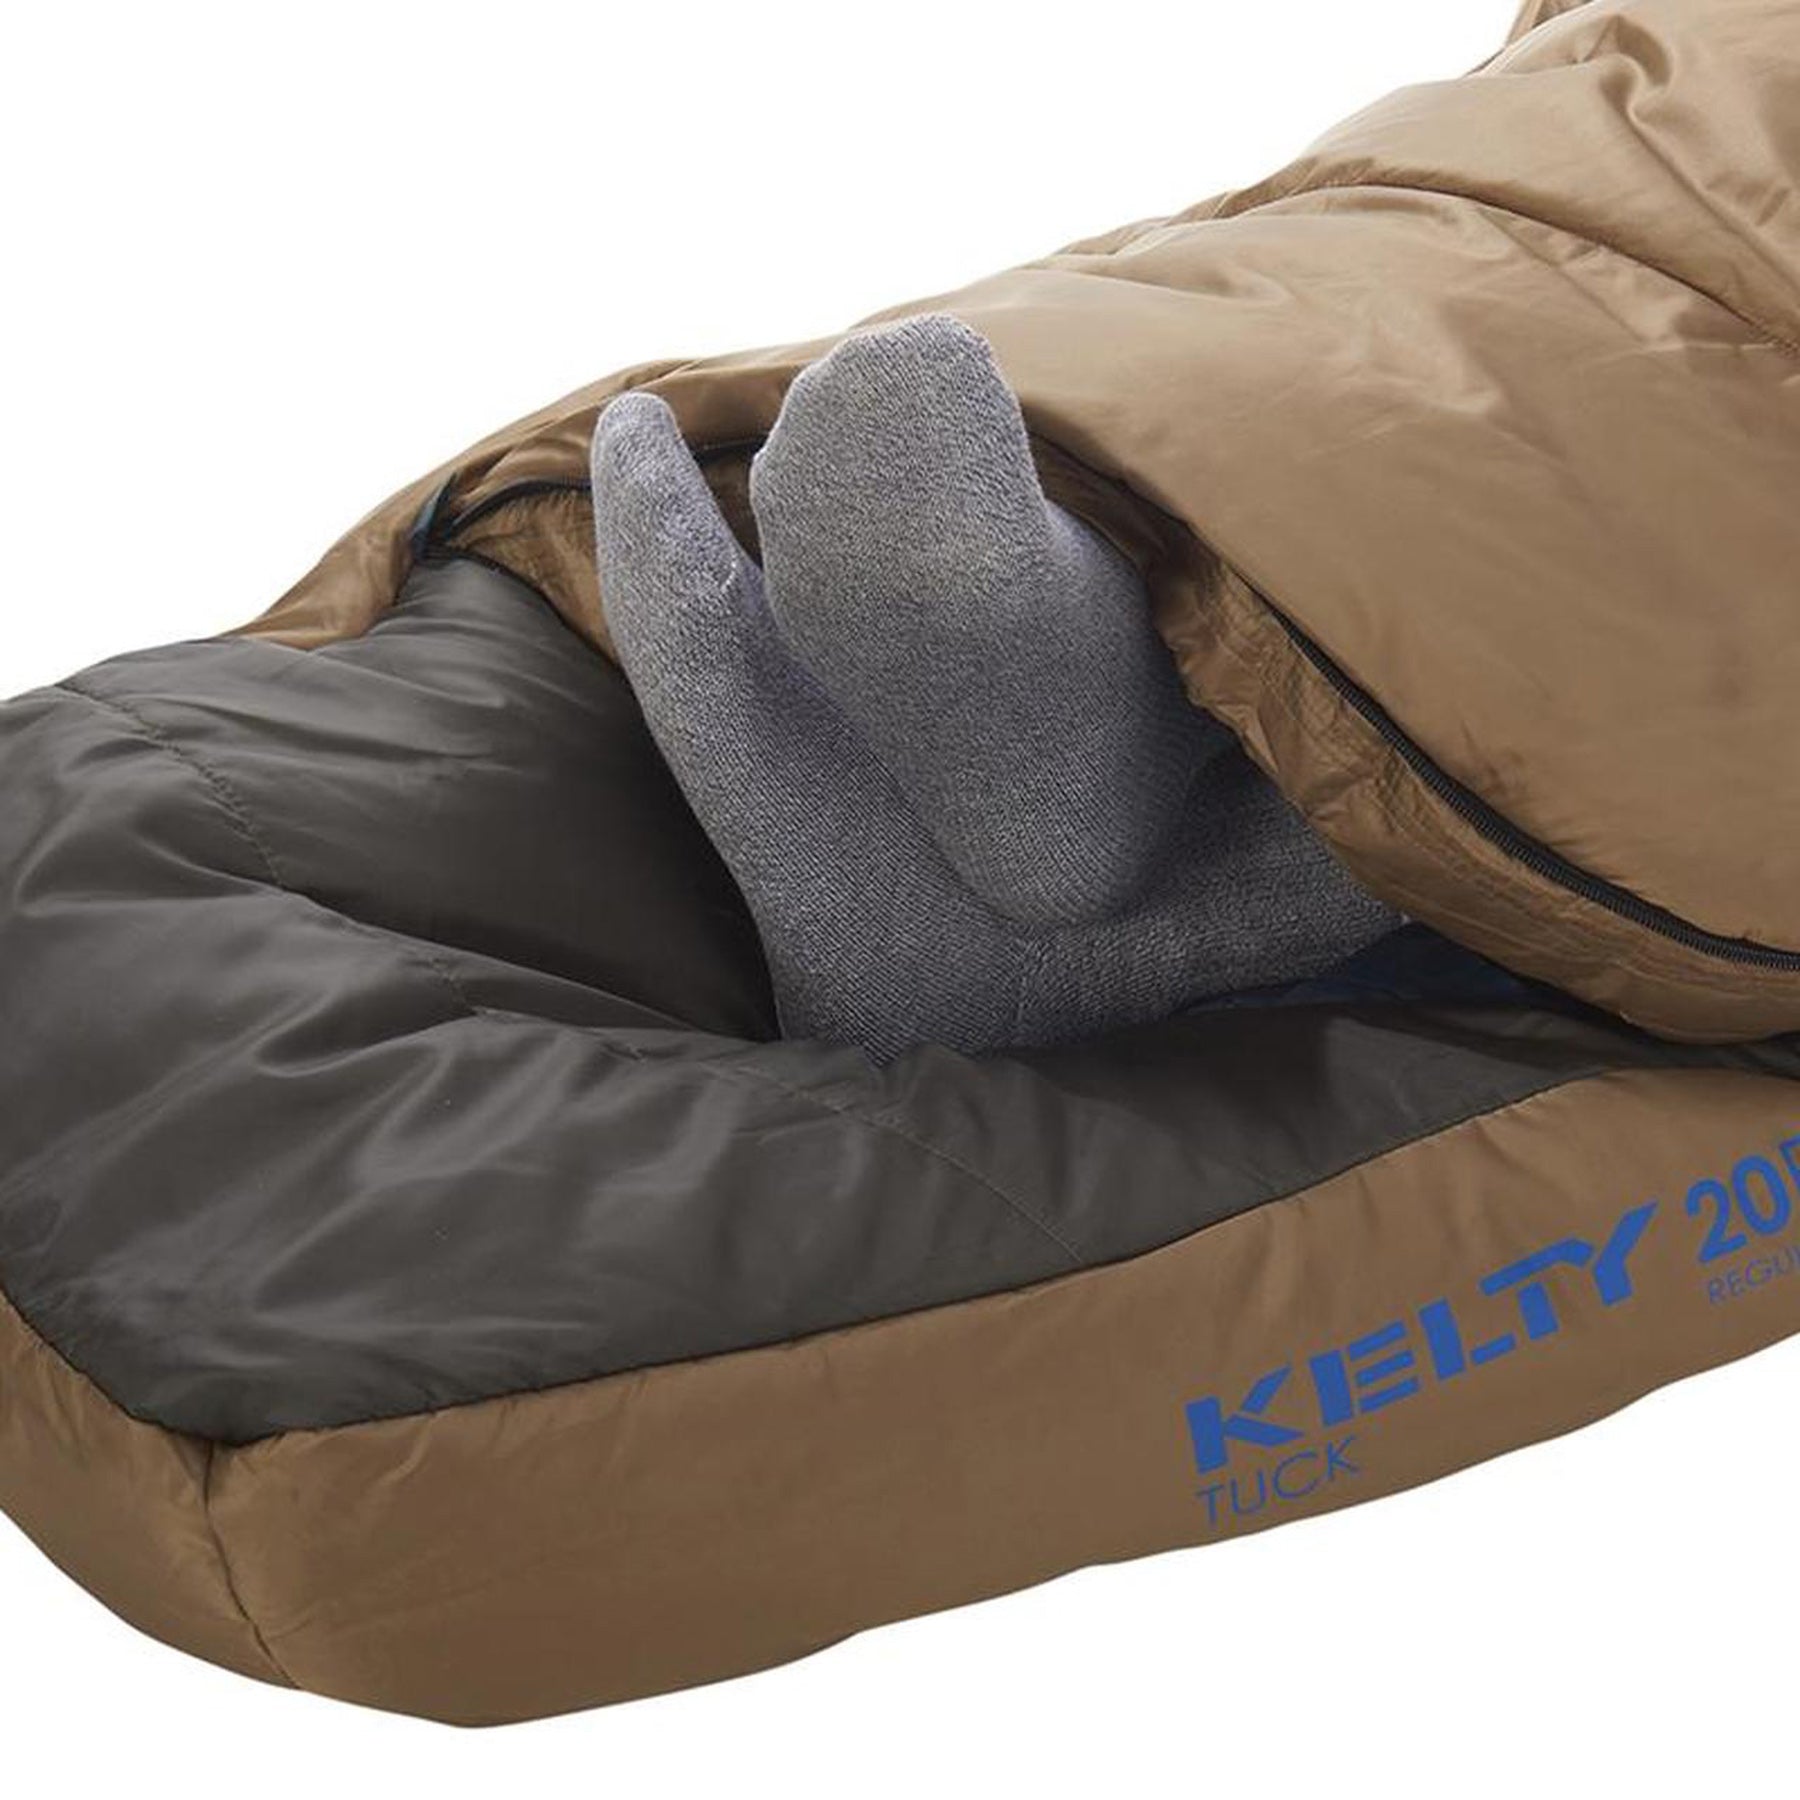 the bottom open with feet sticking out of the tuck 20 sleeping bag